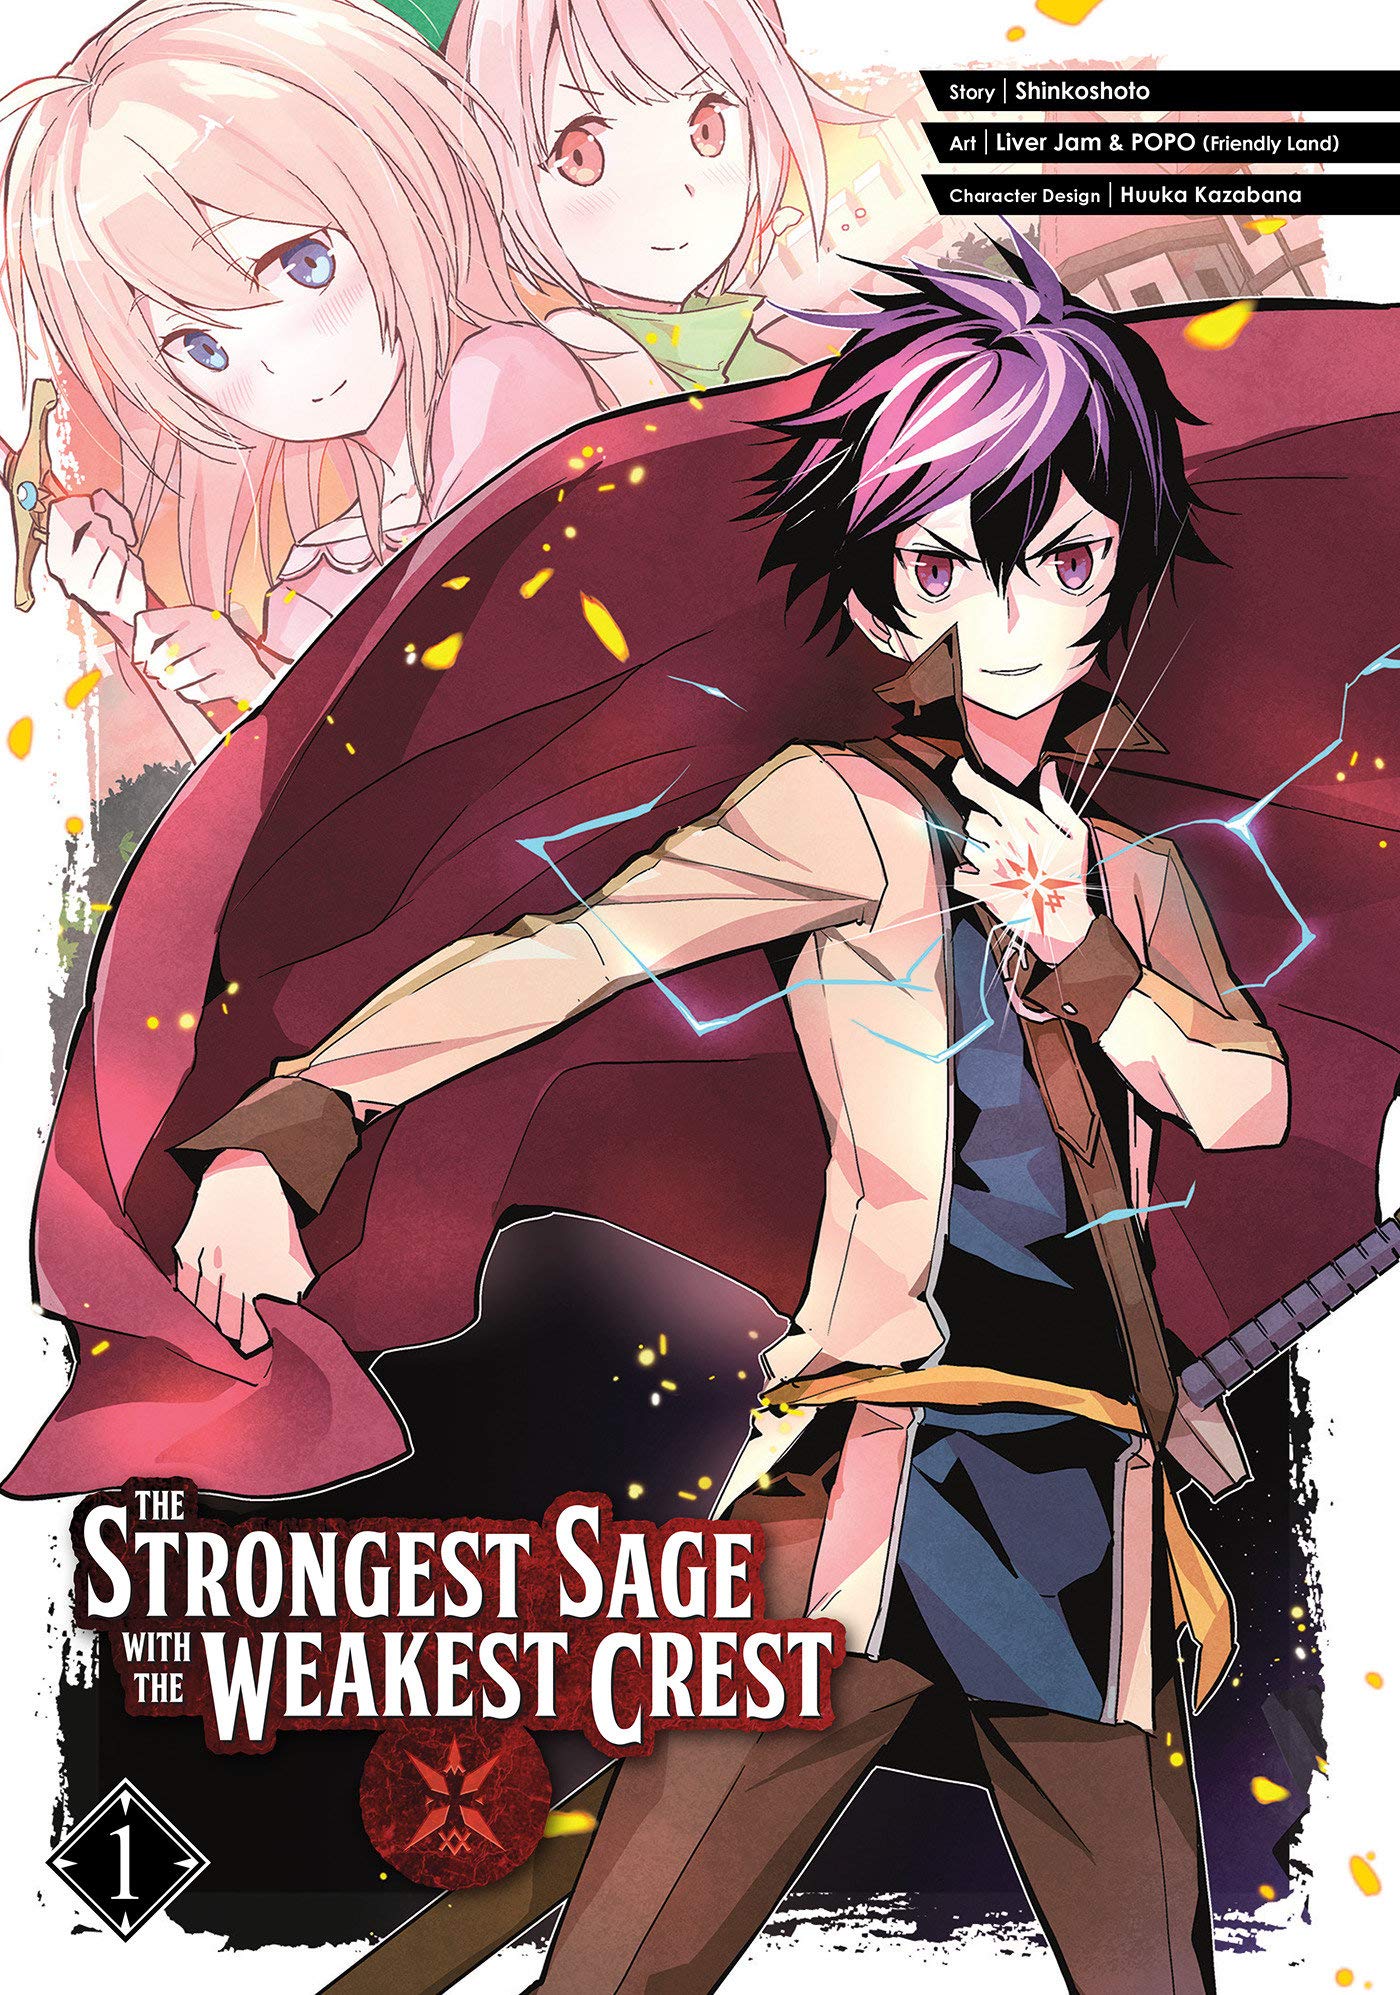 The Strongest Sage With the Weakest Crest - Volume 1